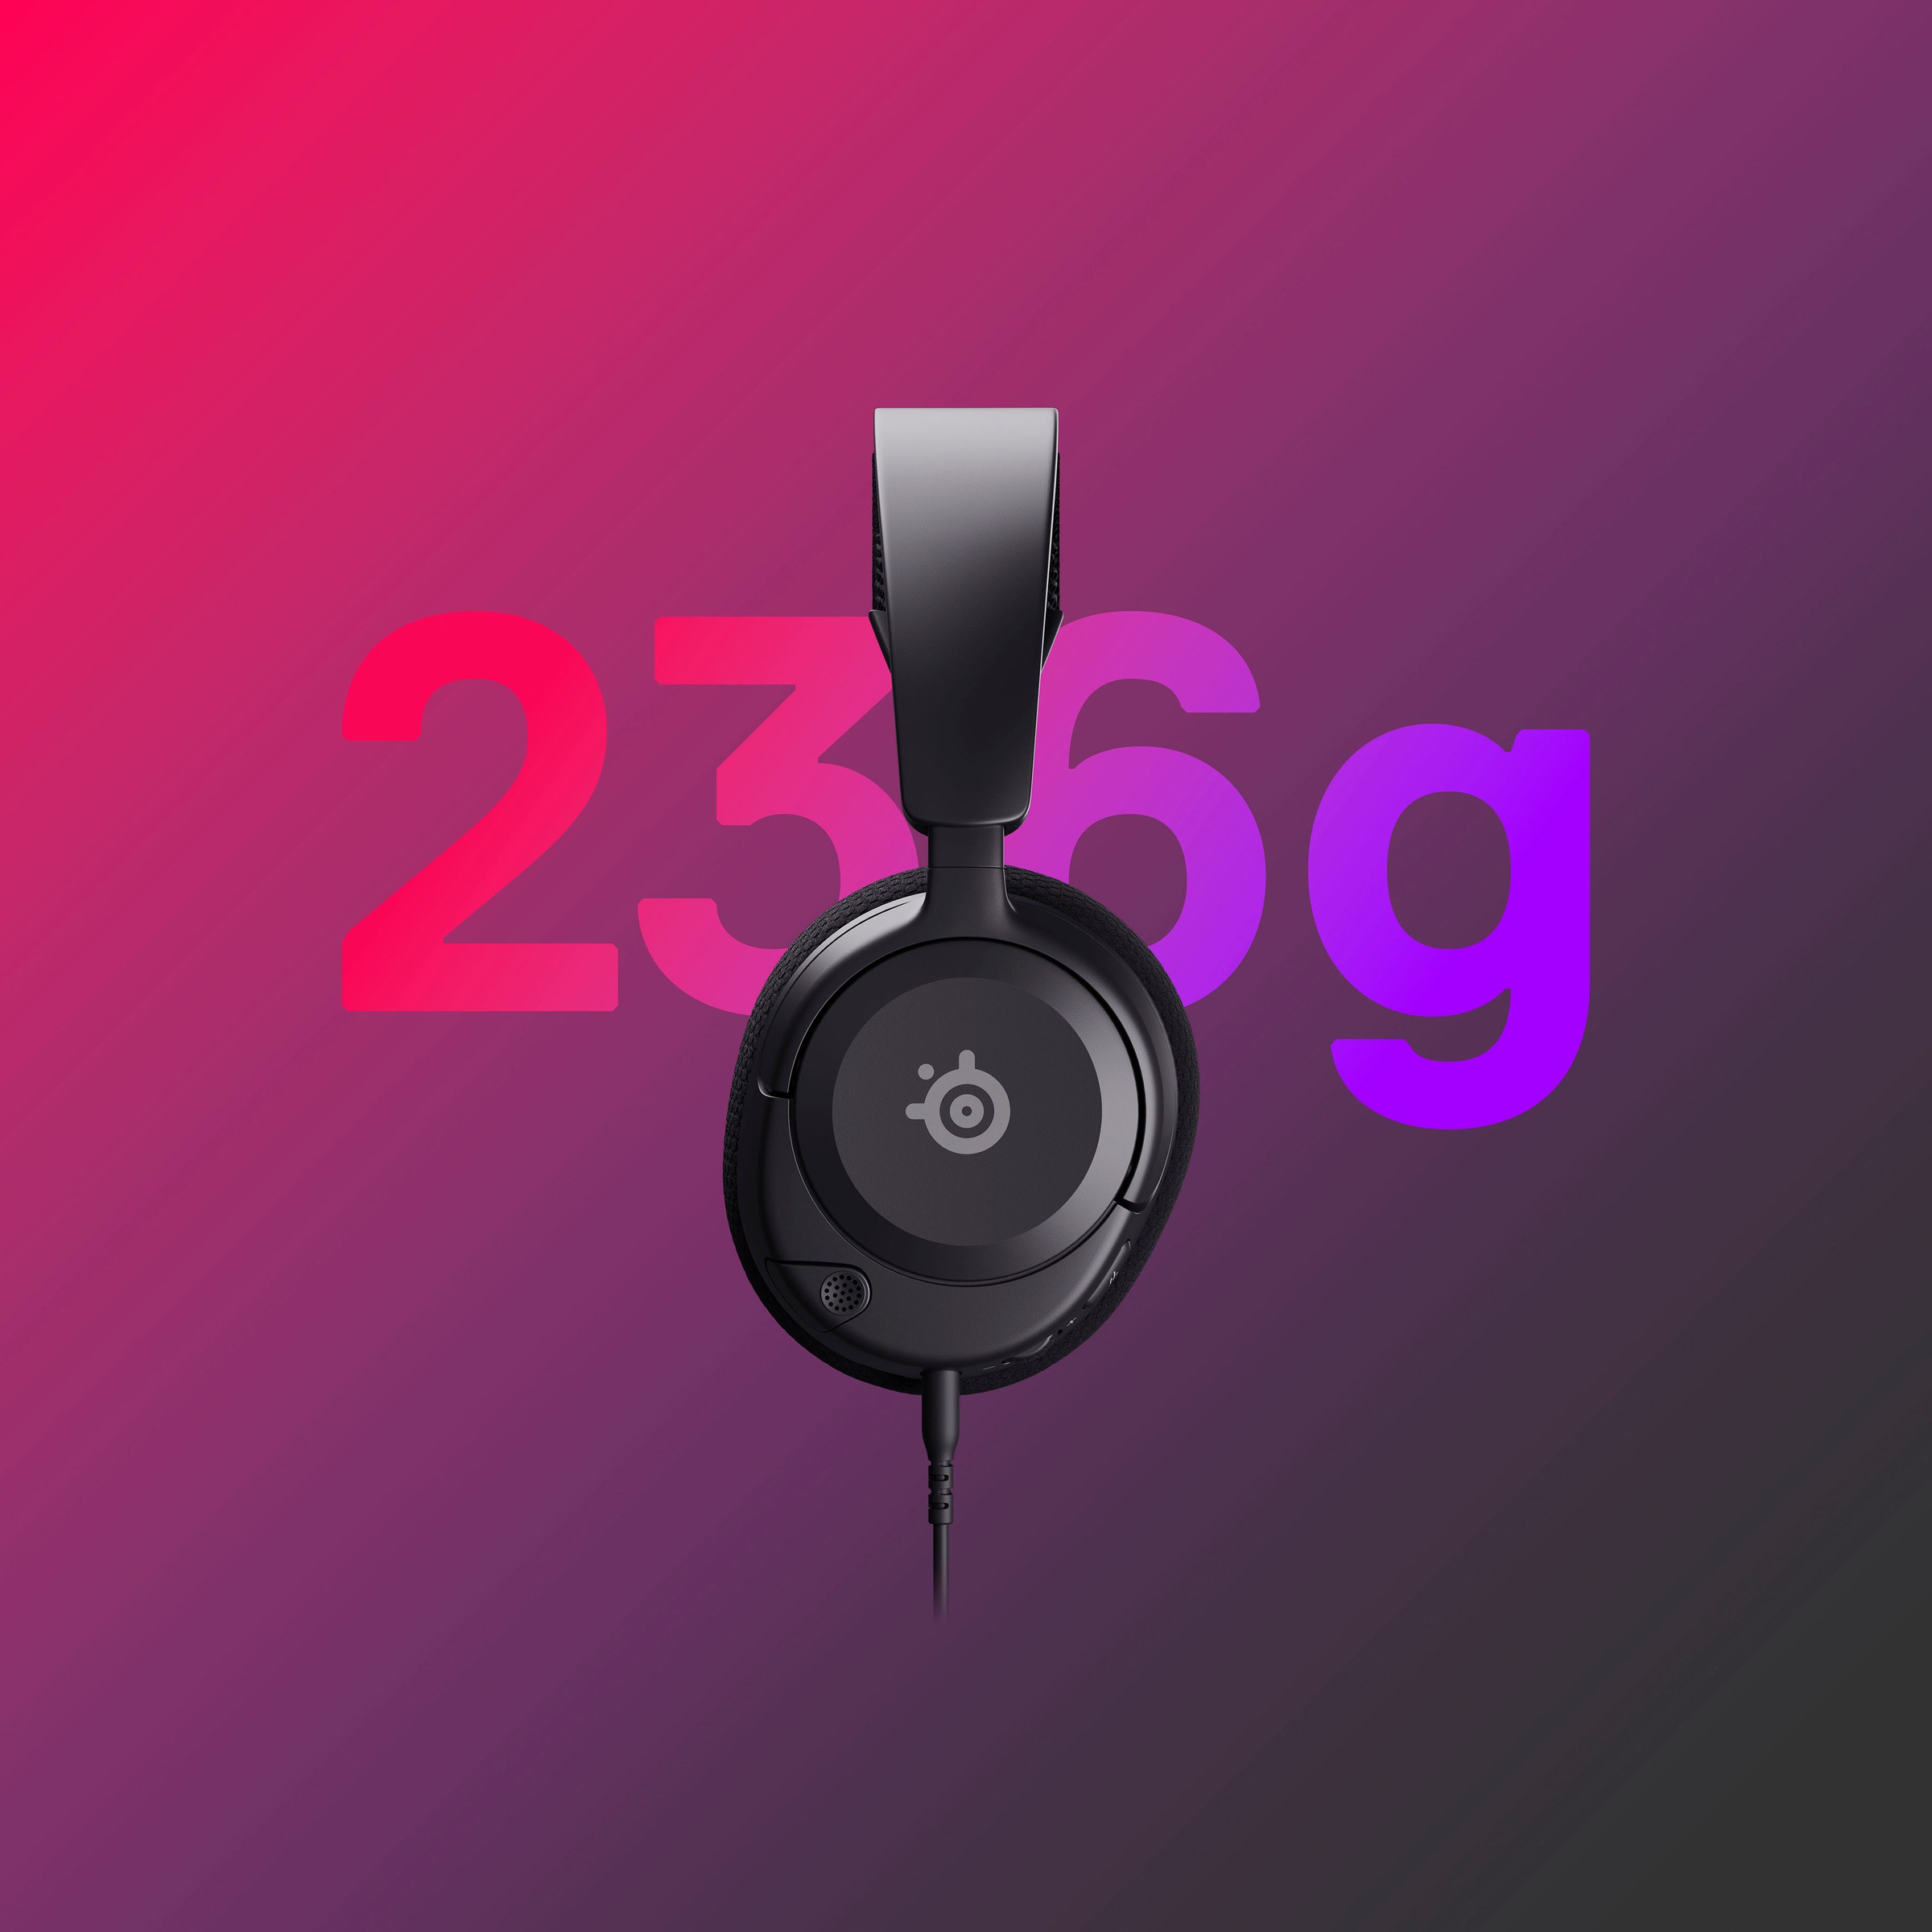 SteelSeries Gaming-Headset »Arctis Nova 1«, Noise-Cancelling